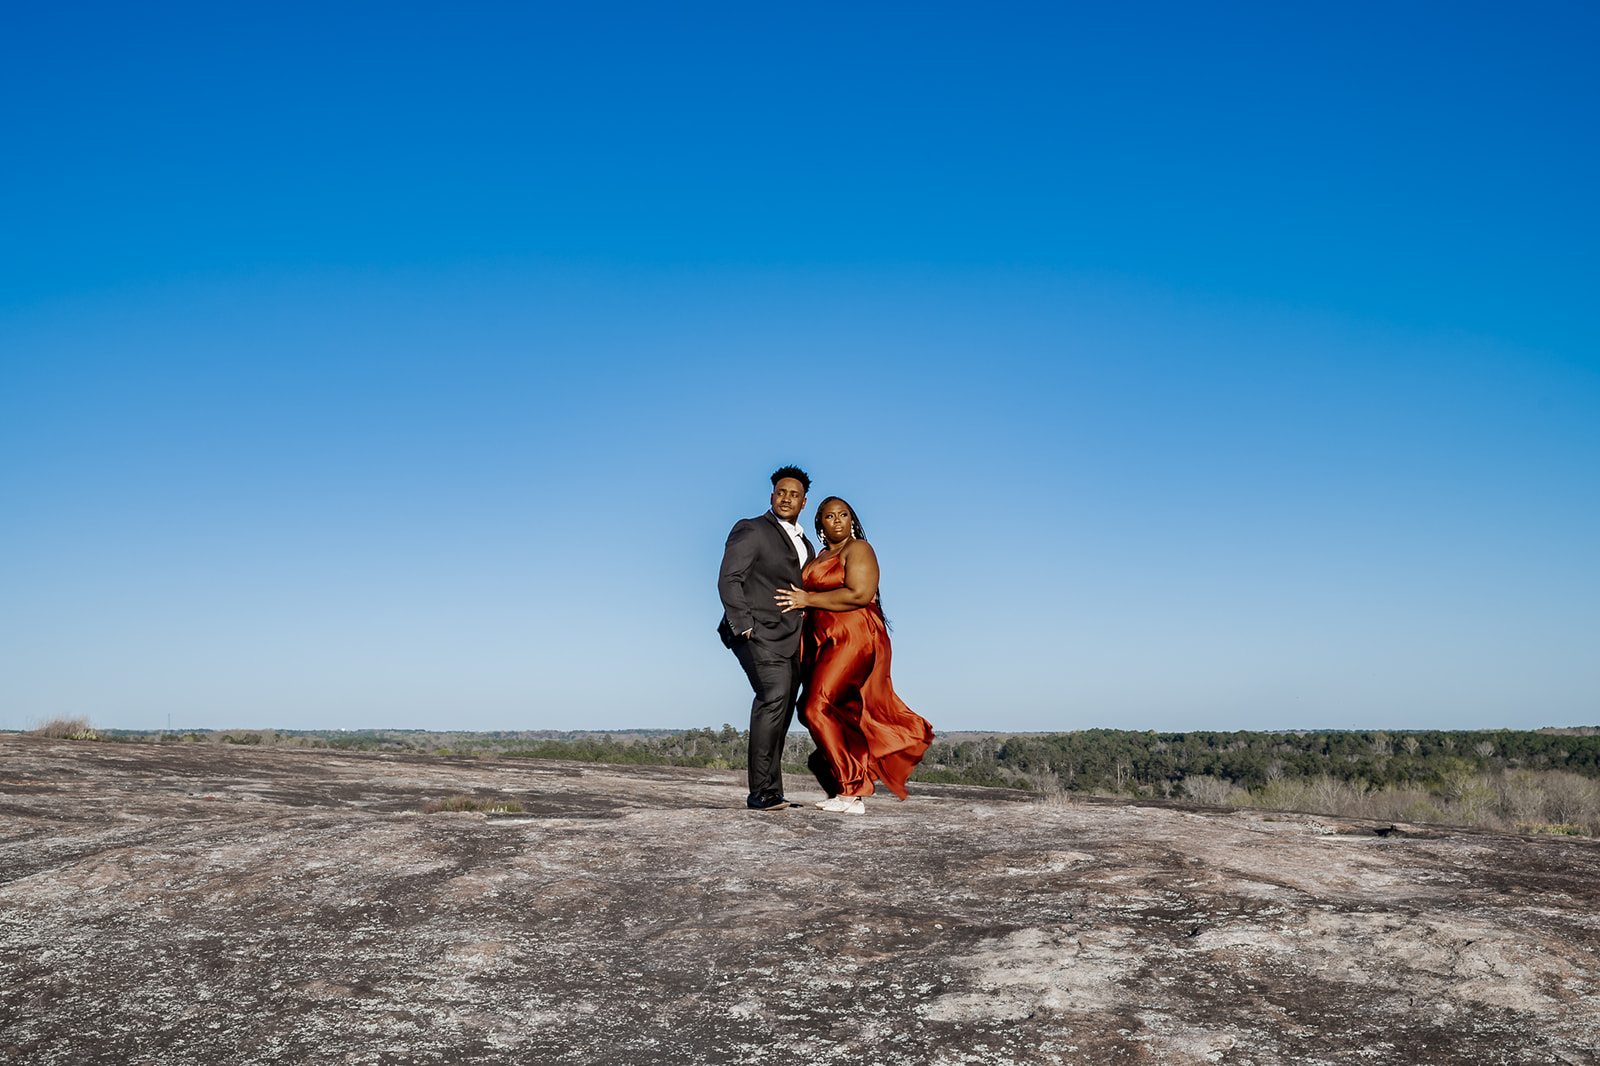 Latisha and Marion recently had the photoshoot of a lifetime at Arabia Mountain. Capturing the beauty of this stunning one-of-a-kind park, they posed for romantic shots under the vast sky, waltzed through splendid nature trails, and enjoyed each other's company in the most breathtaking setting.